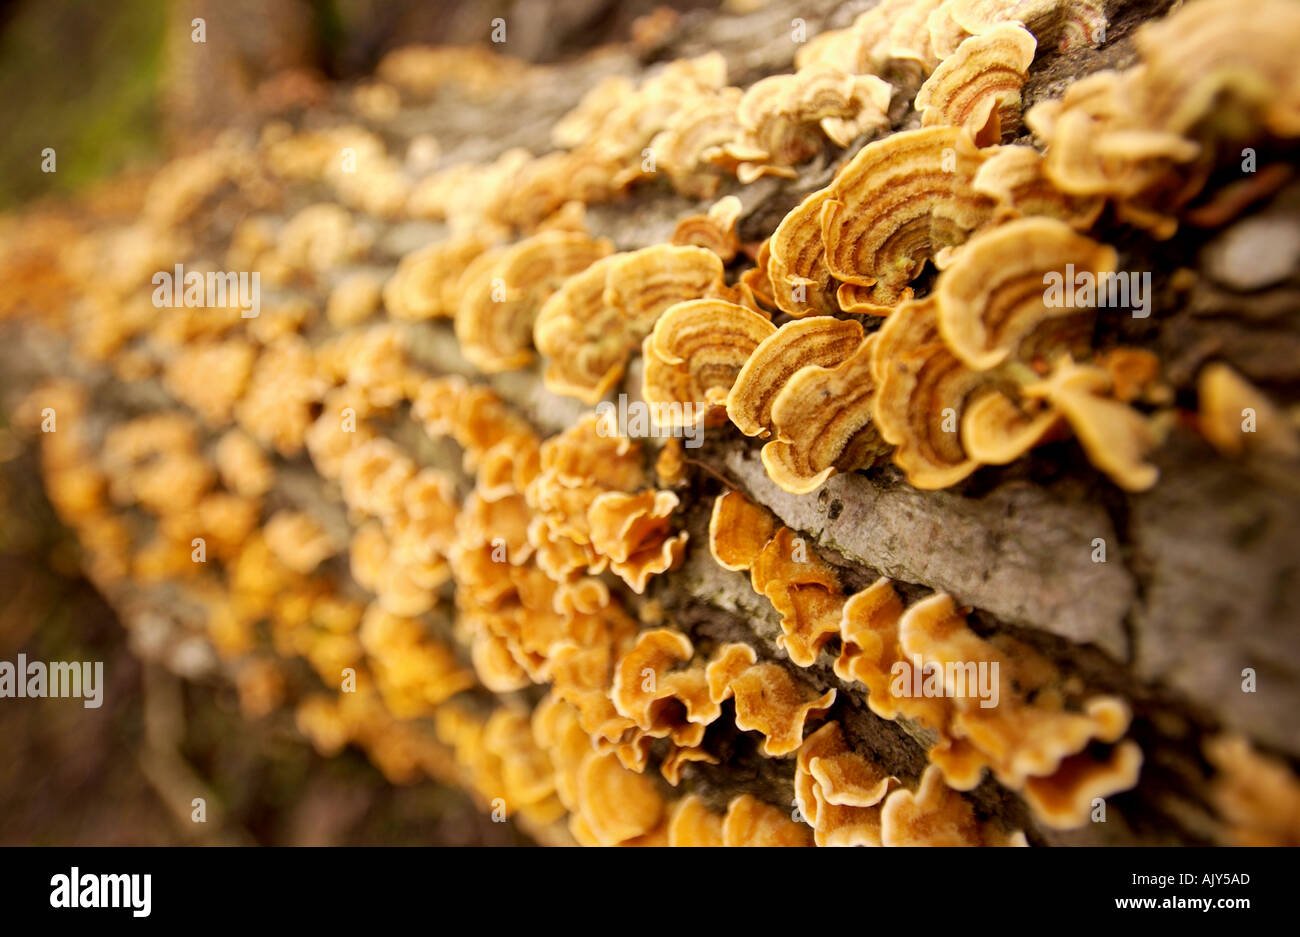 OLD LOGS WITH MOSS AND FUNGUS IN ENGLISH WOODLAND UK Stock Photo